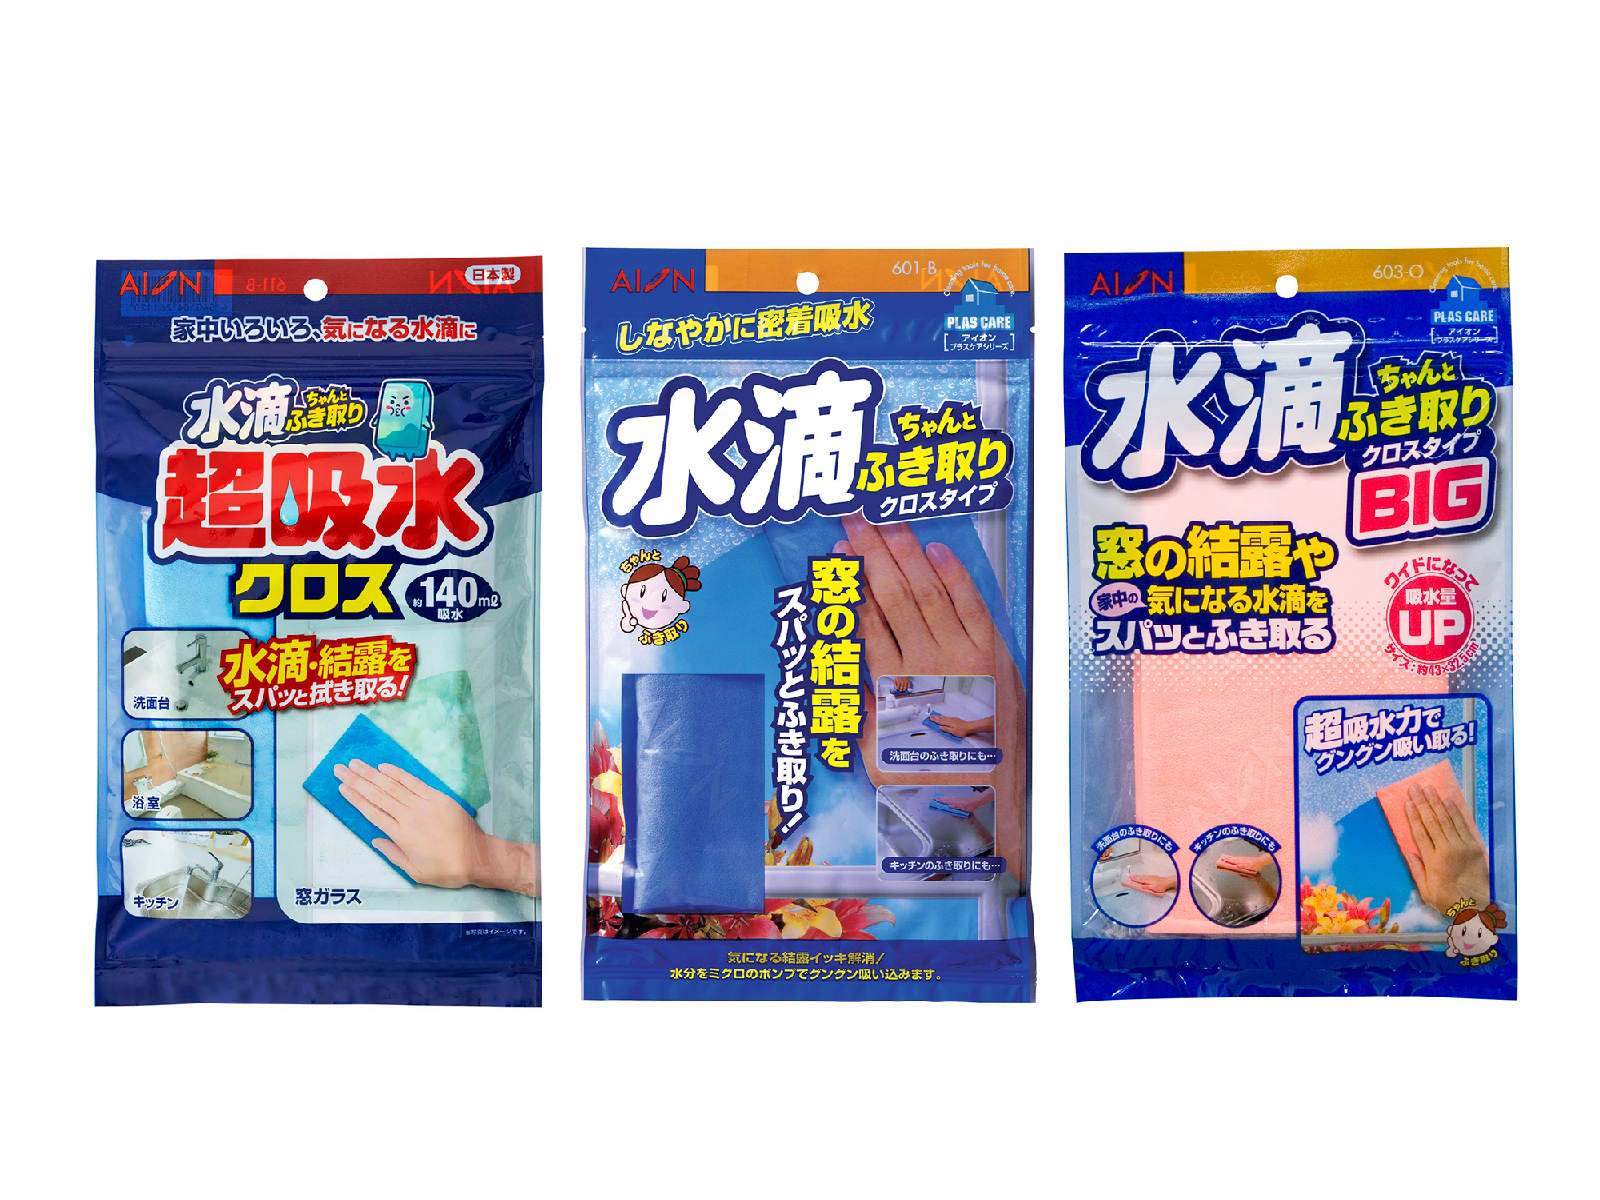 Waterdrop Wiping, absorbing Sponge Series (Cloth Type for Home Cleaning and Dew Absorption)